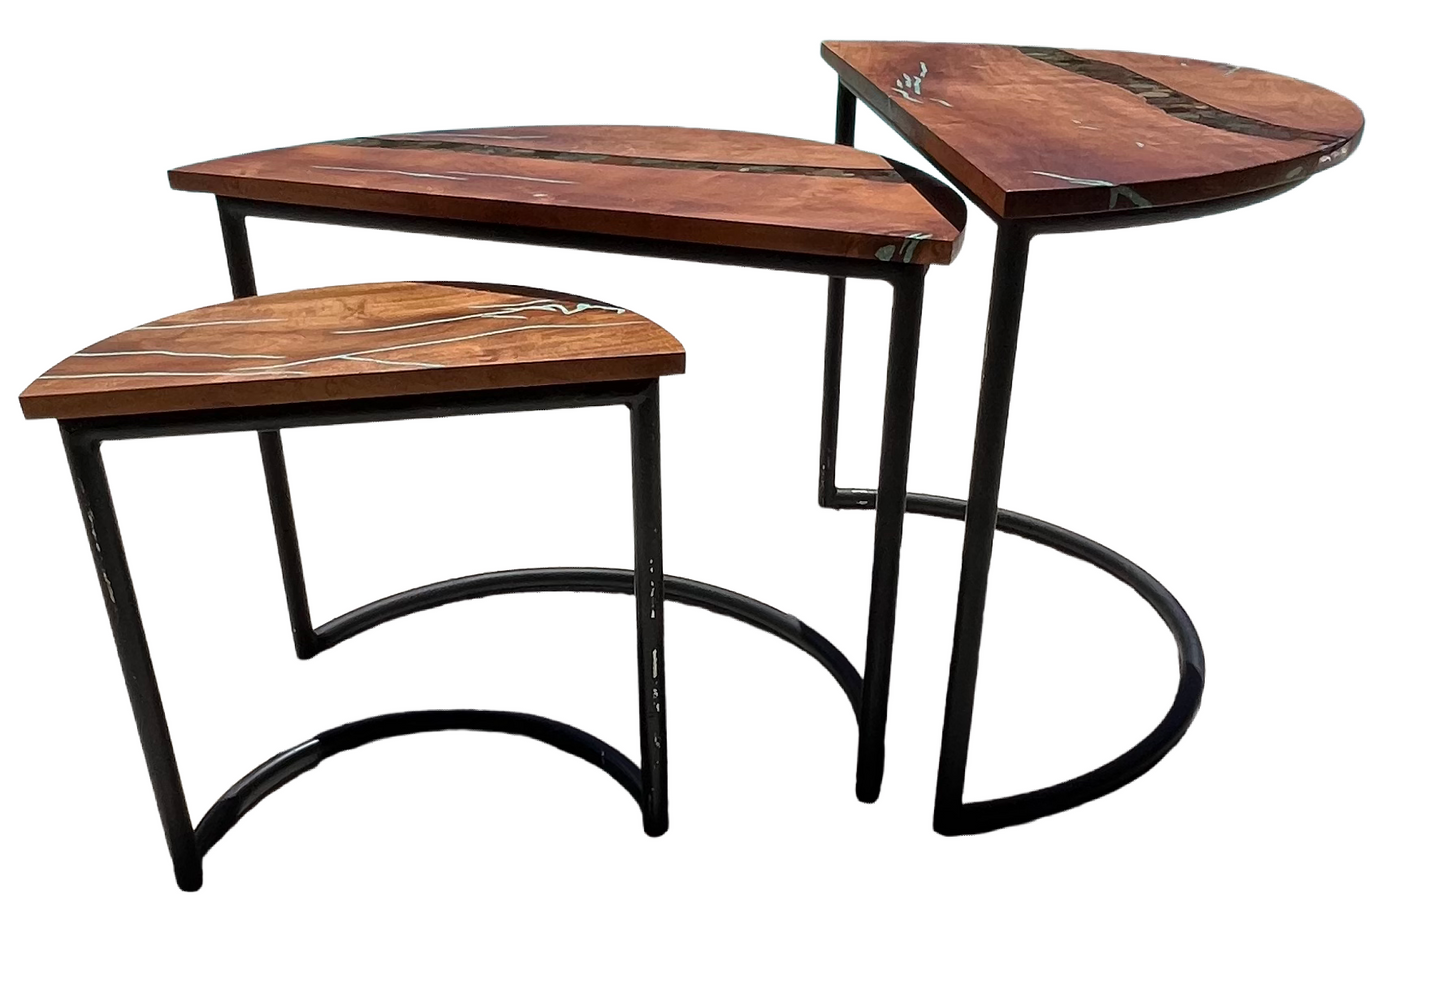 Demi Lune Nesting Tables with River Rock and Turquoise inlay